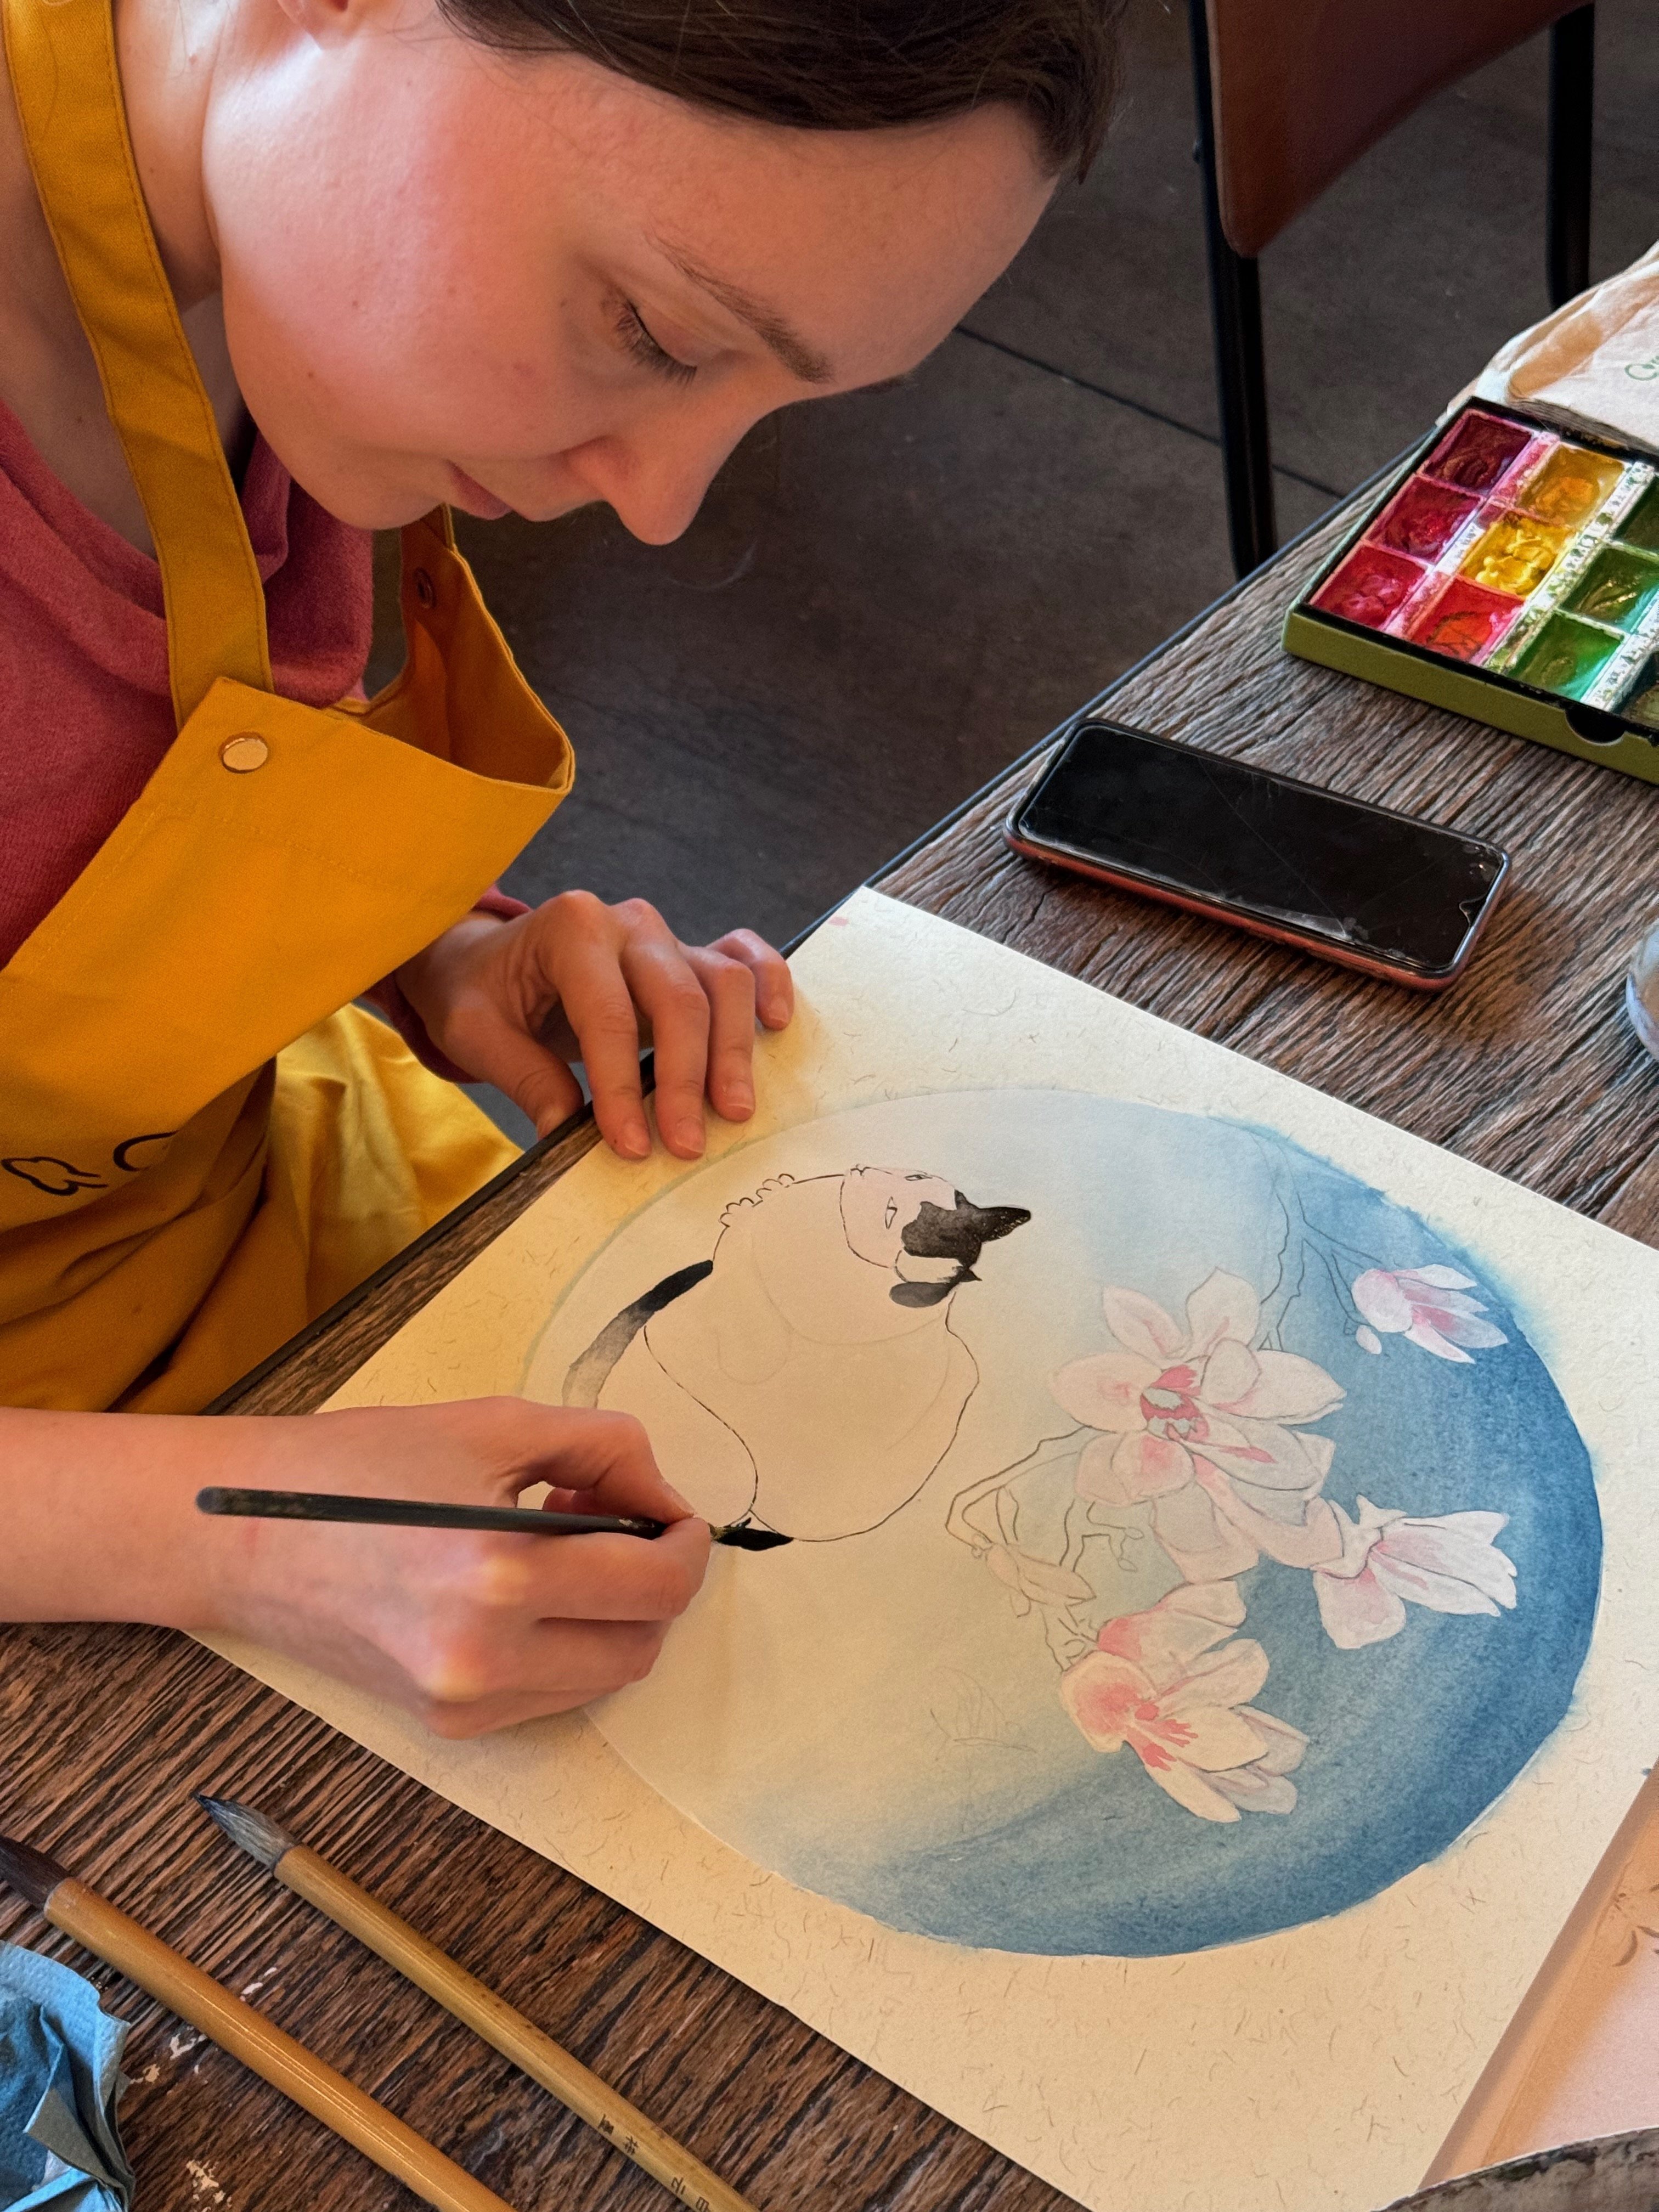 Japanese Painting Workshop @92 Degrees No.1 Spinningfields